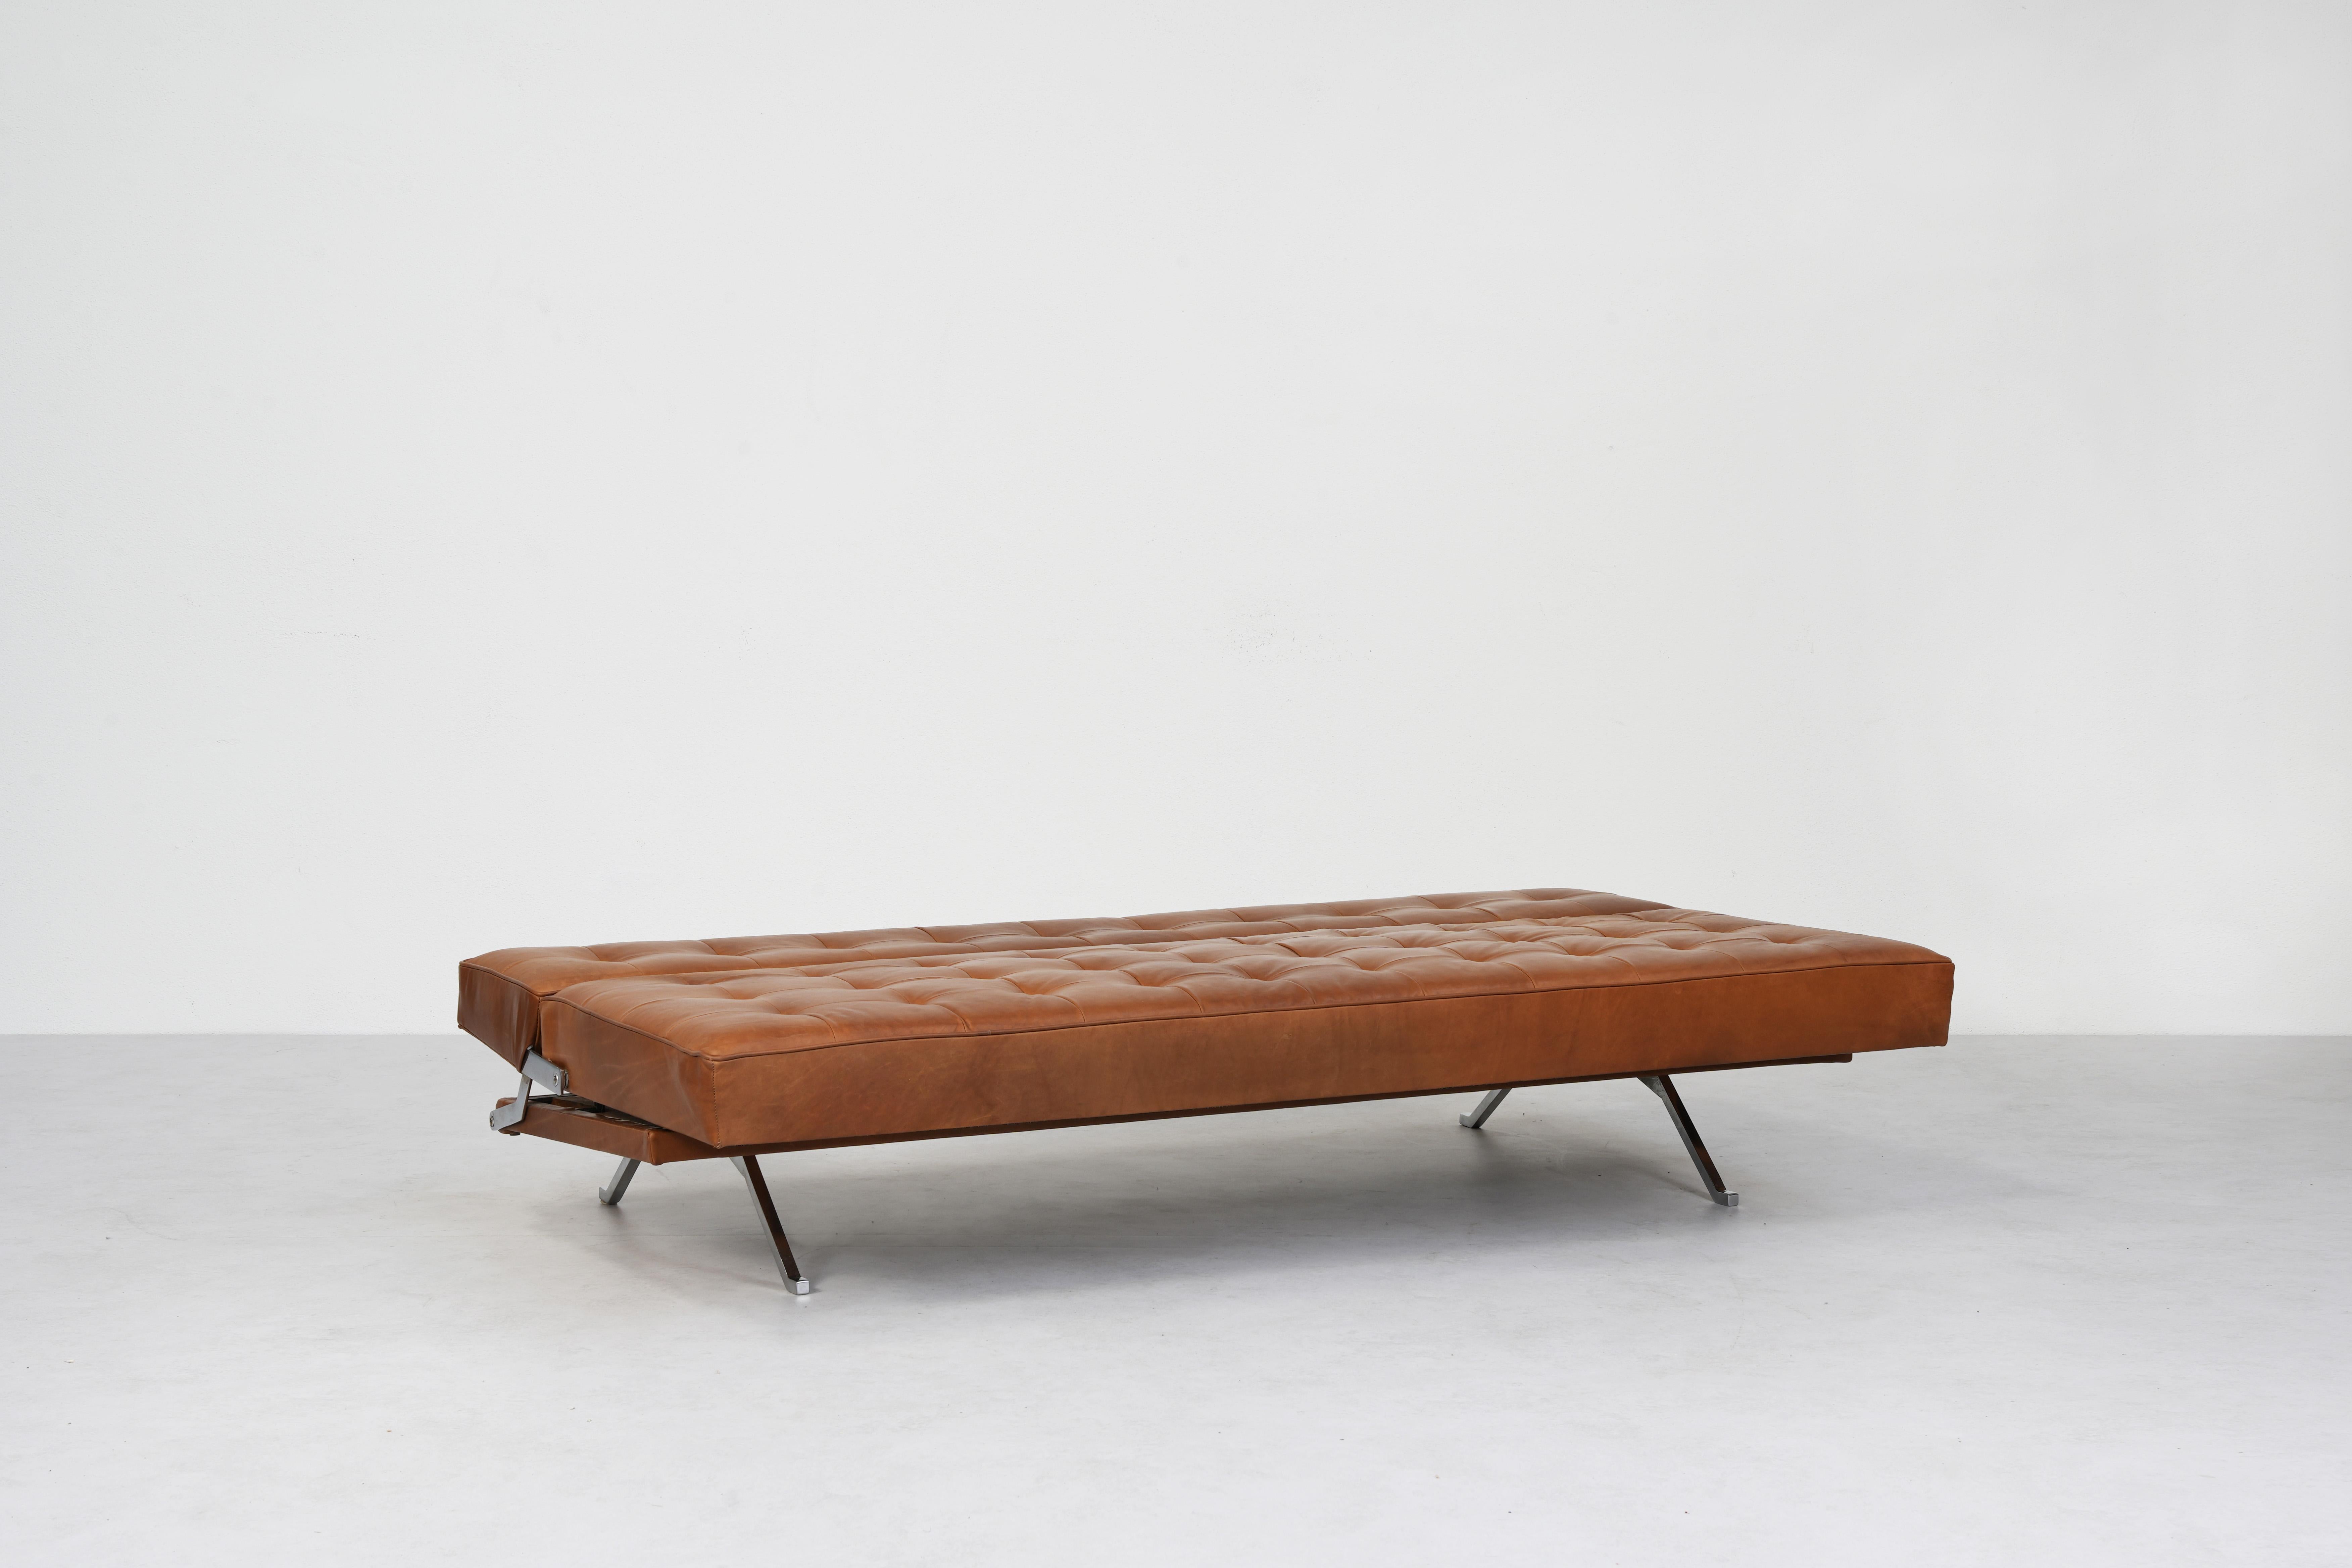 20th Century Sofa Daybed Constanze by Johannes Spalt for Wittmann, Austria 1960ies